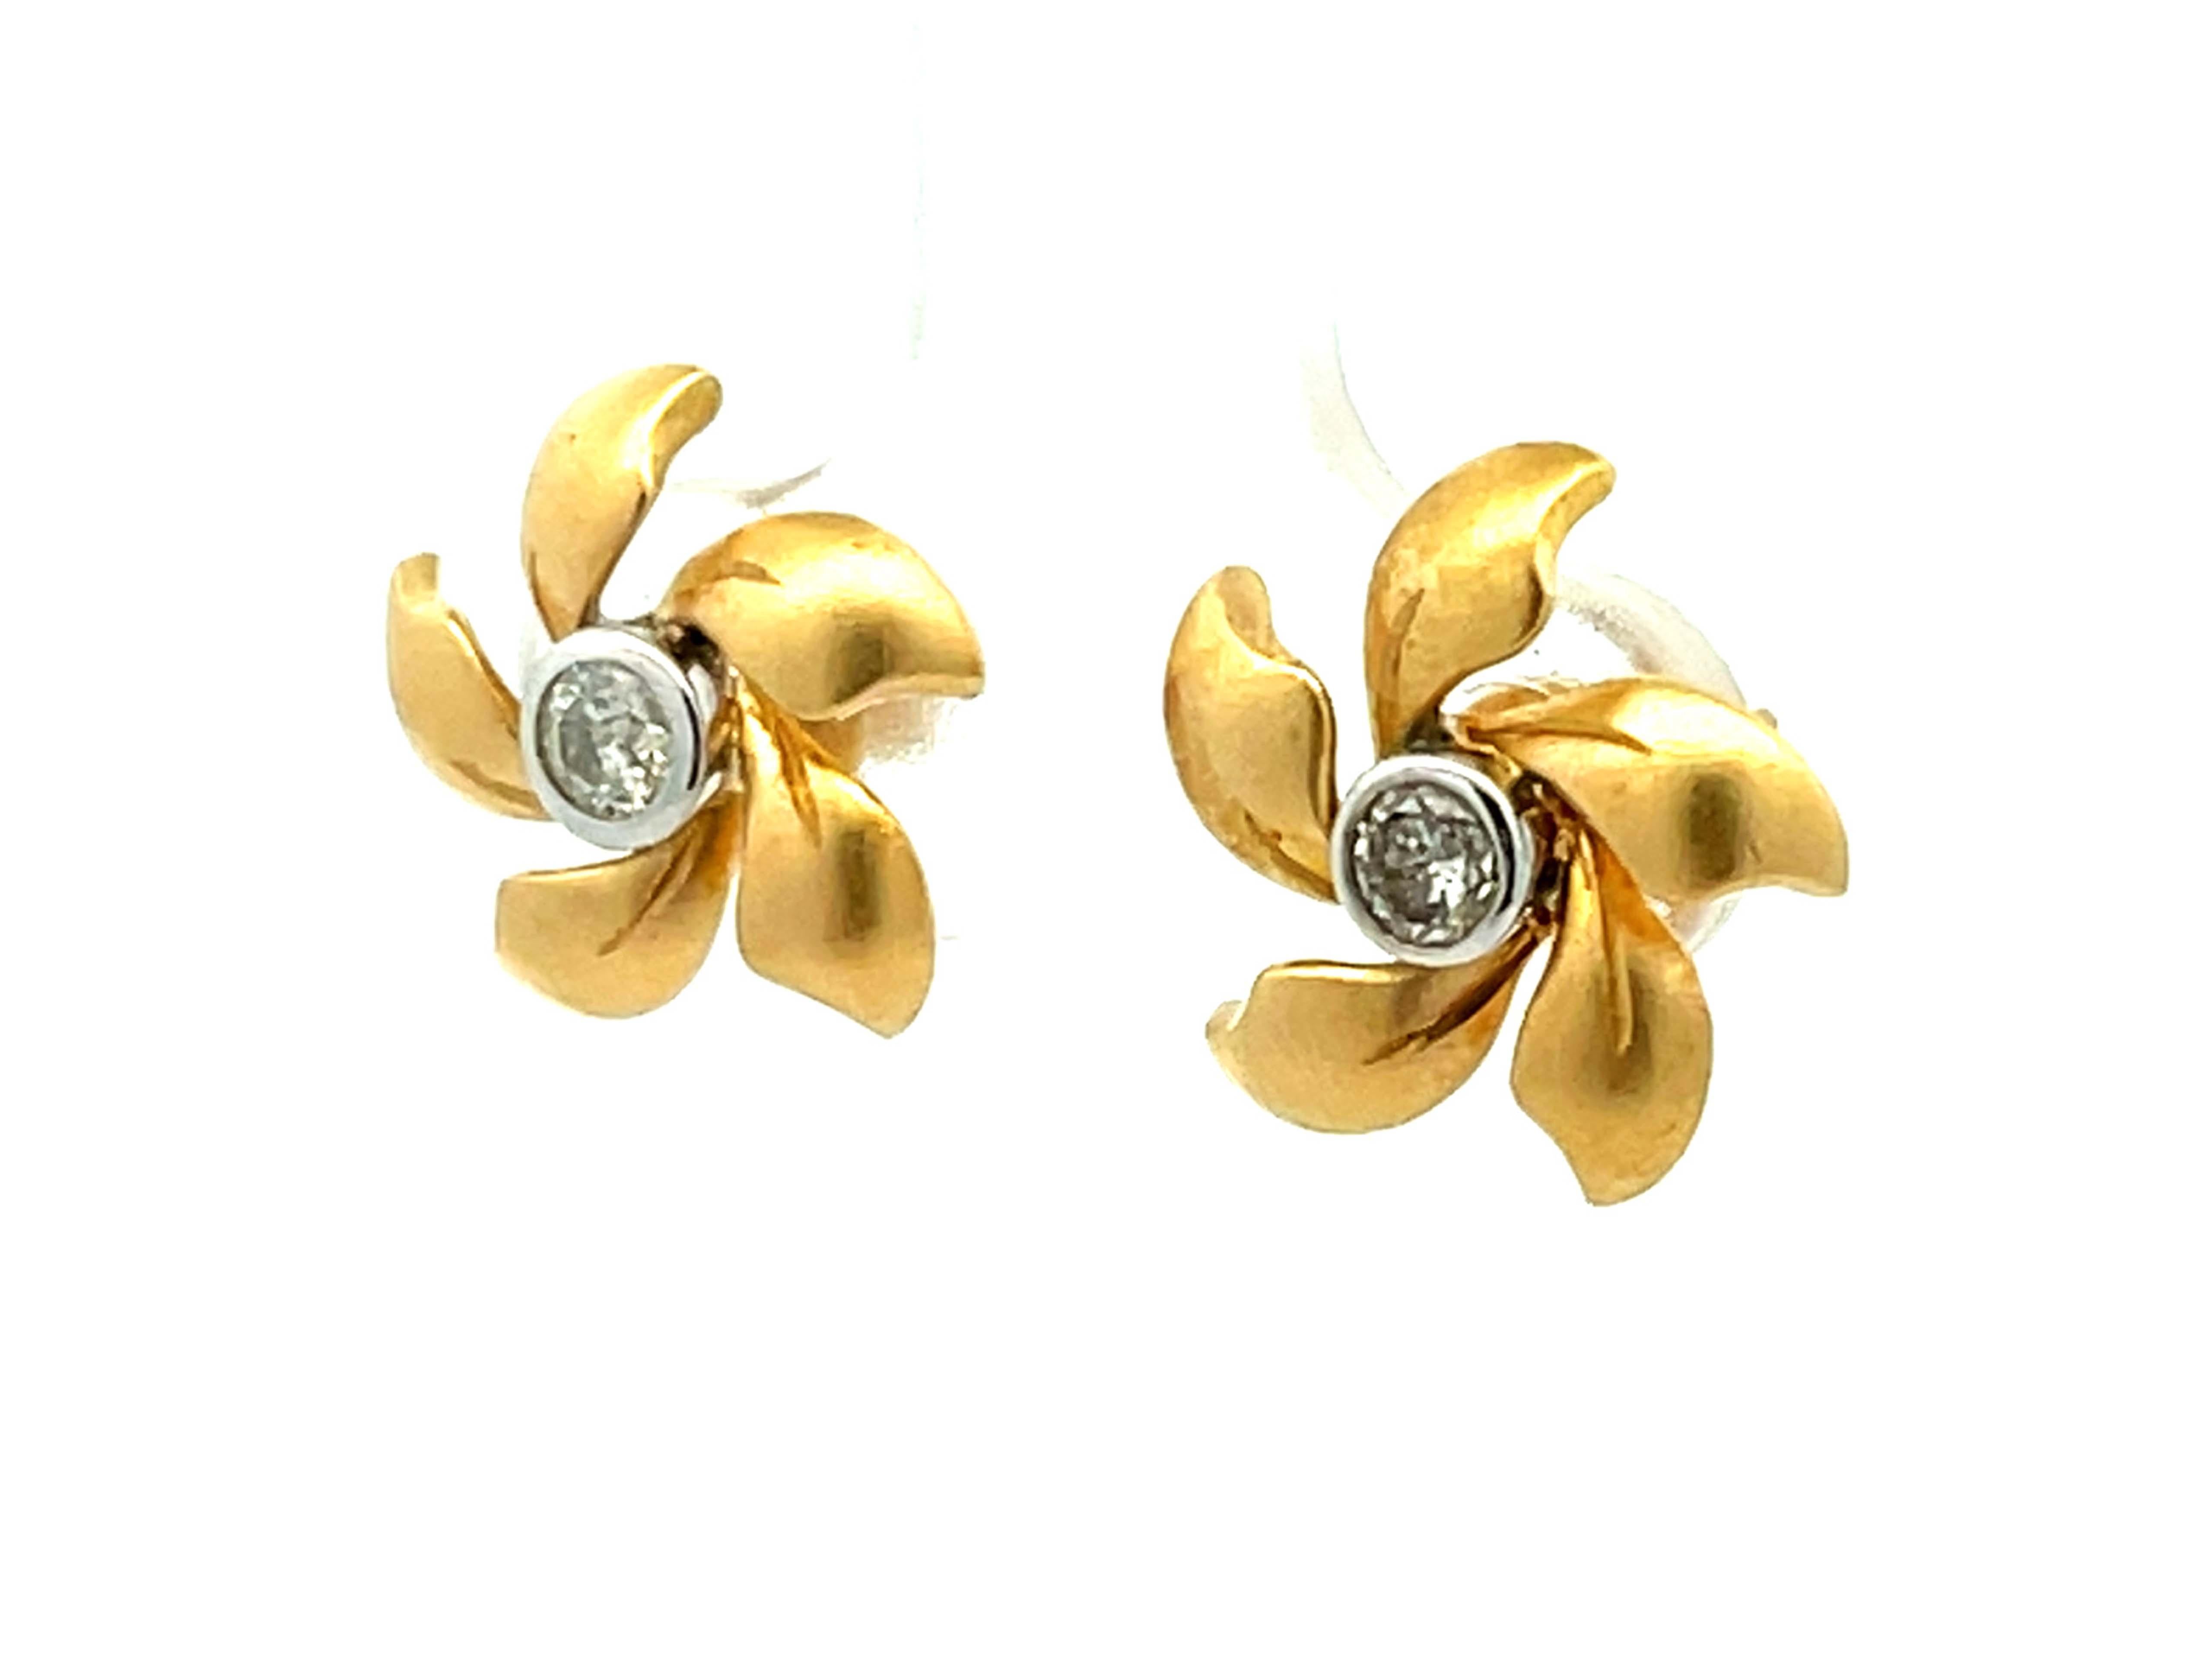 Brilliant Cut Satin Finish Flower and Diamond Center Stud Earrings in 14k Yellow Gold For Sale